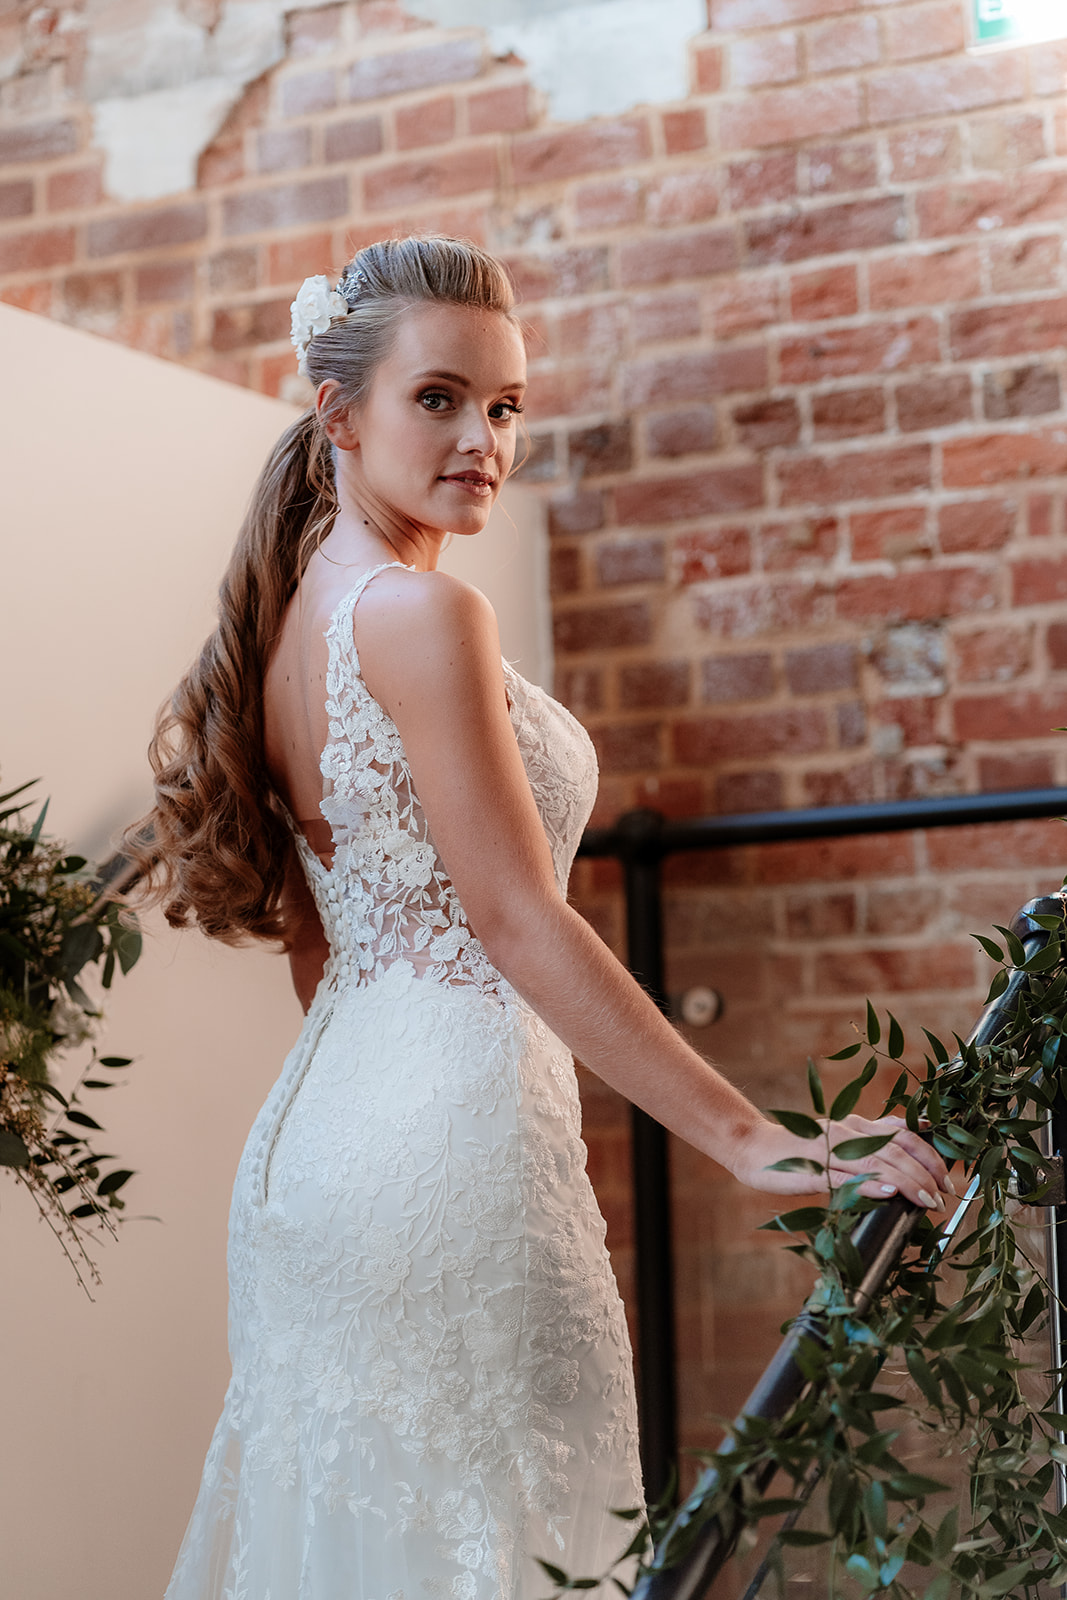 Bride in a white lace dress and bridal ponytail with white flowers in her hair stands on a foliage draped staircase. 